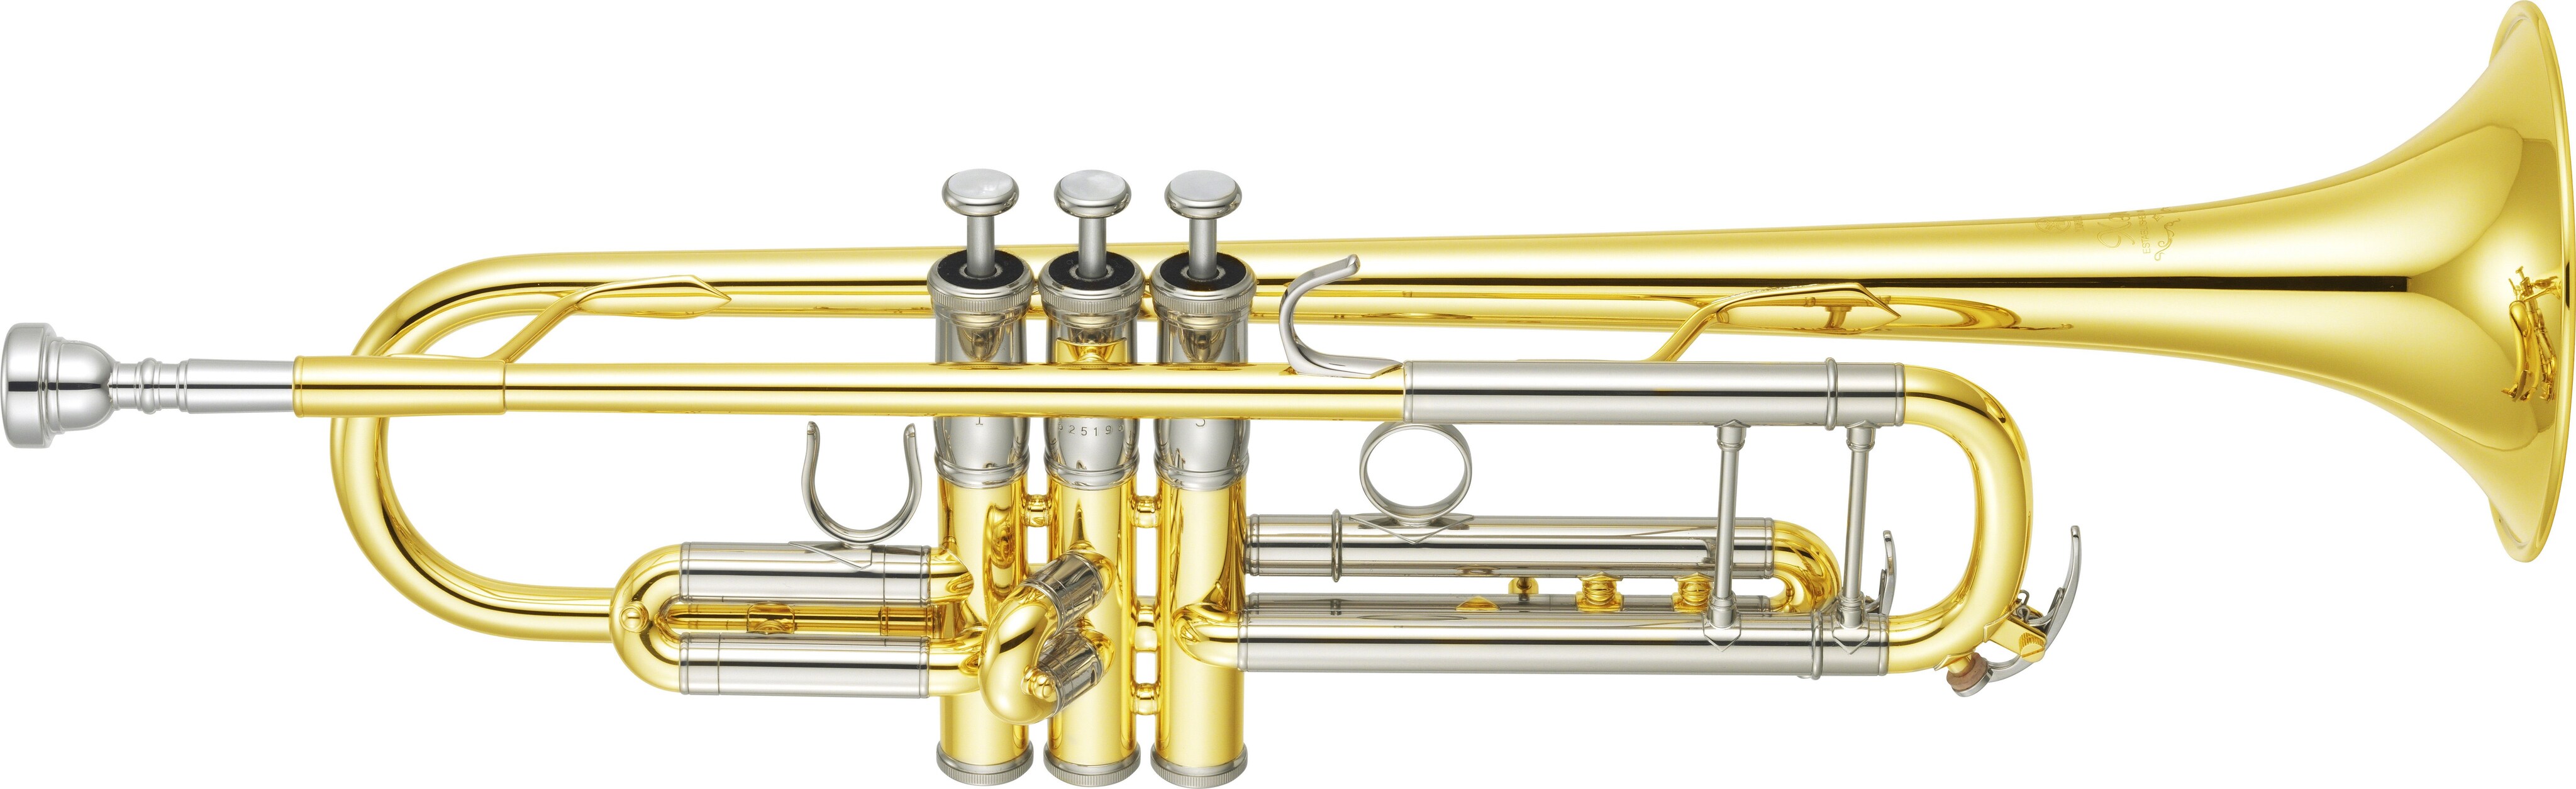 YTR-8335S - Overview - Bb Trumpets - Trumpets - Brass & Woodwinds 